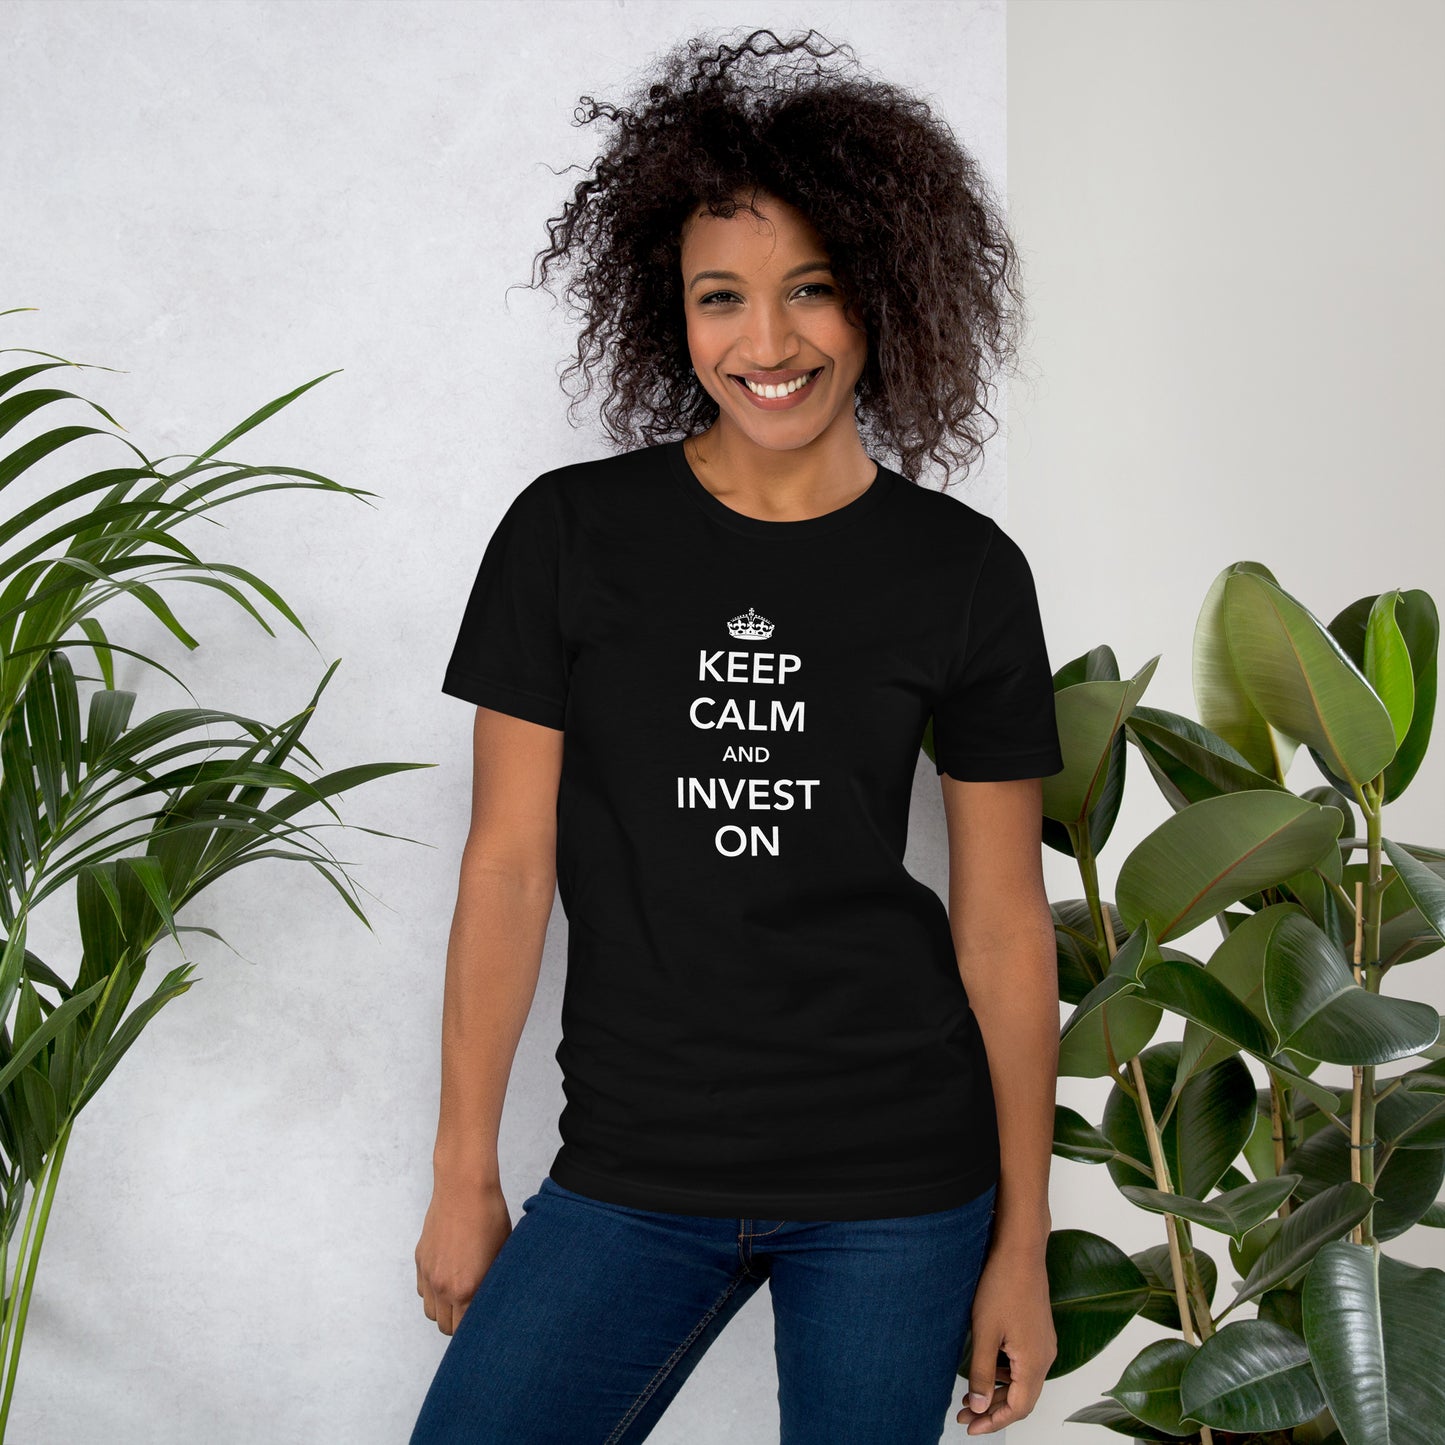 Keep Calm And Invest On Unisex T-Shirt